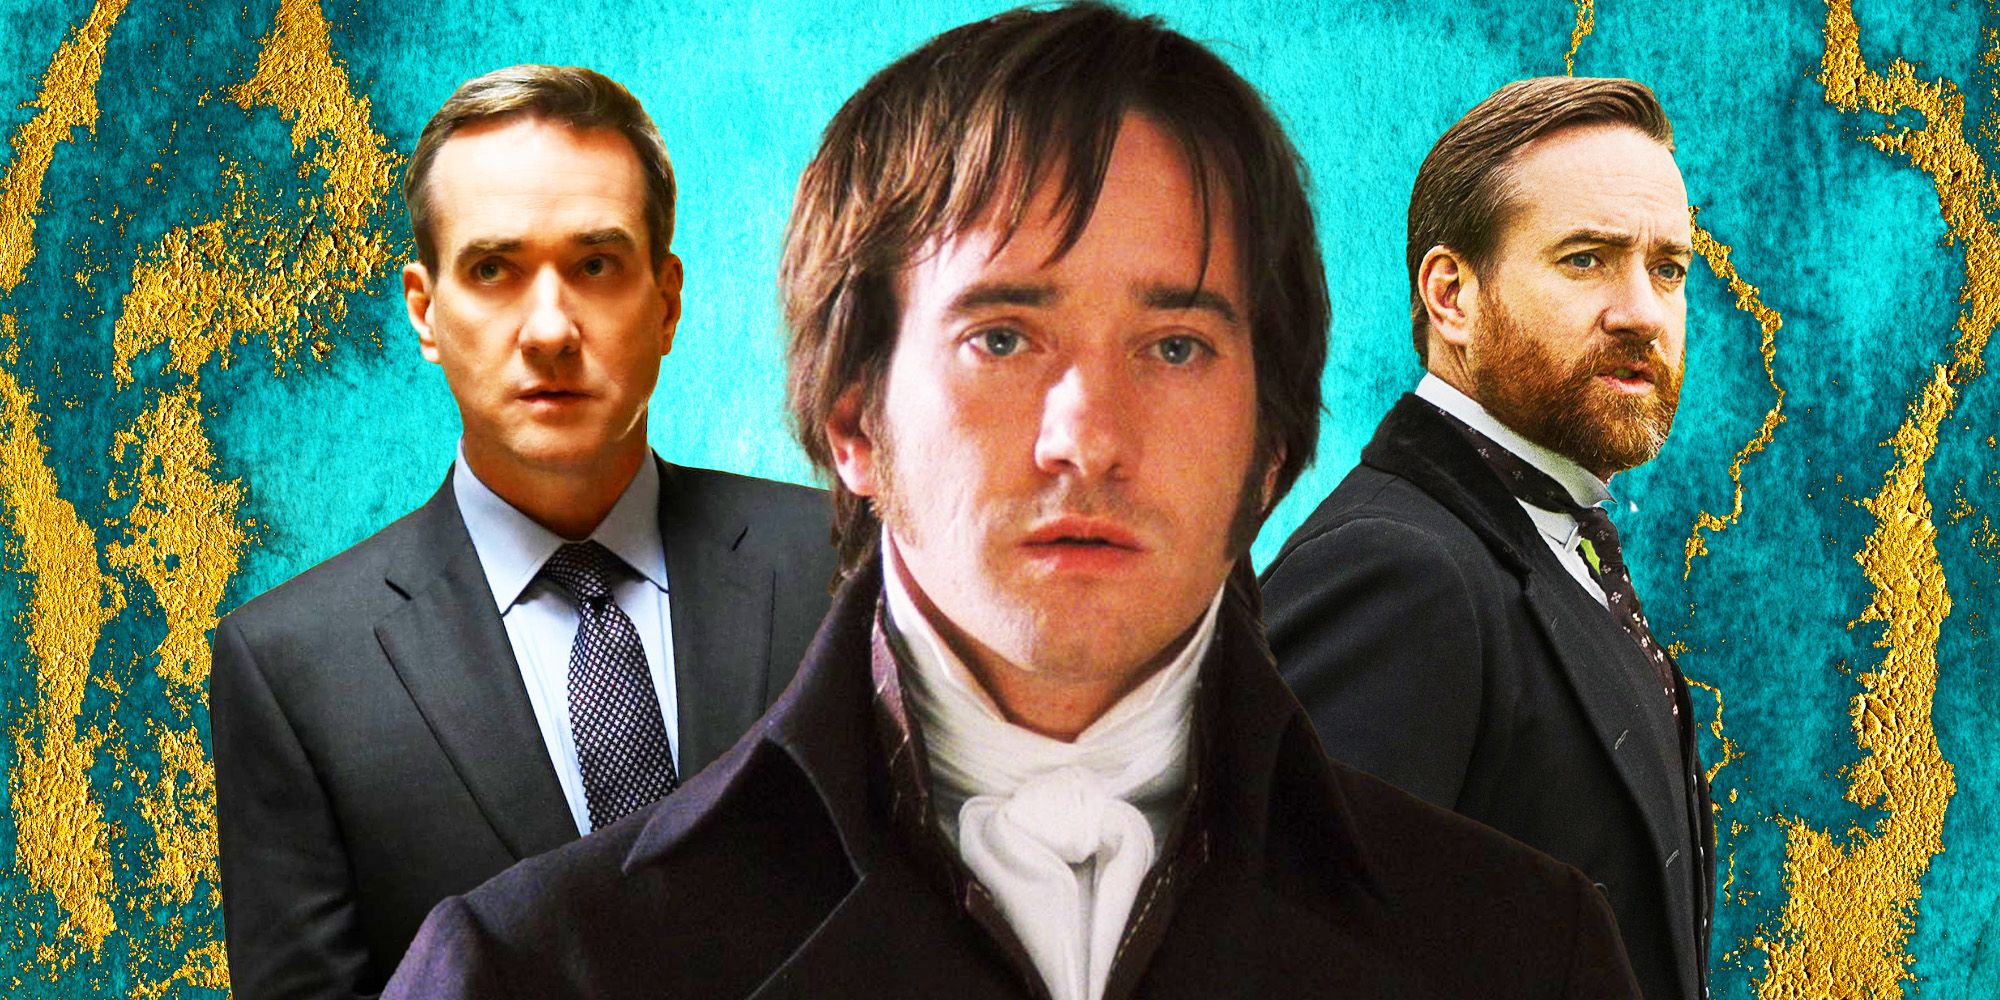 Matthew Macfadyen from Succession, Pride and Prejudice, and Howards End